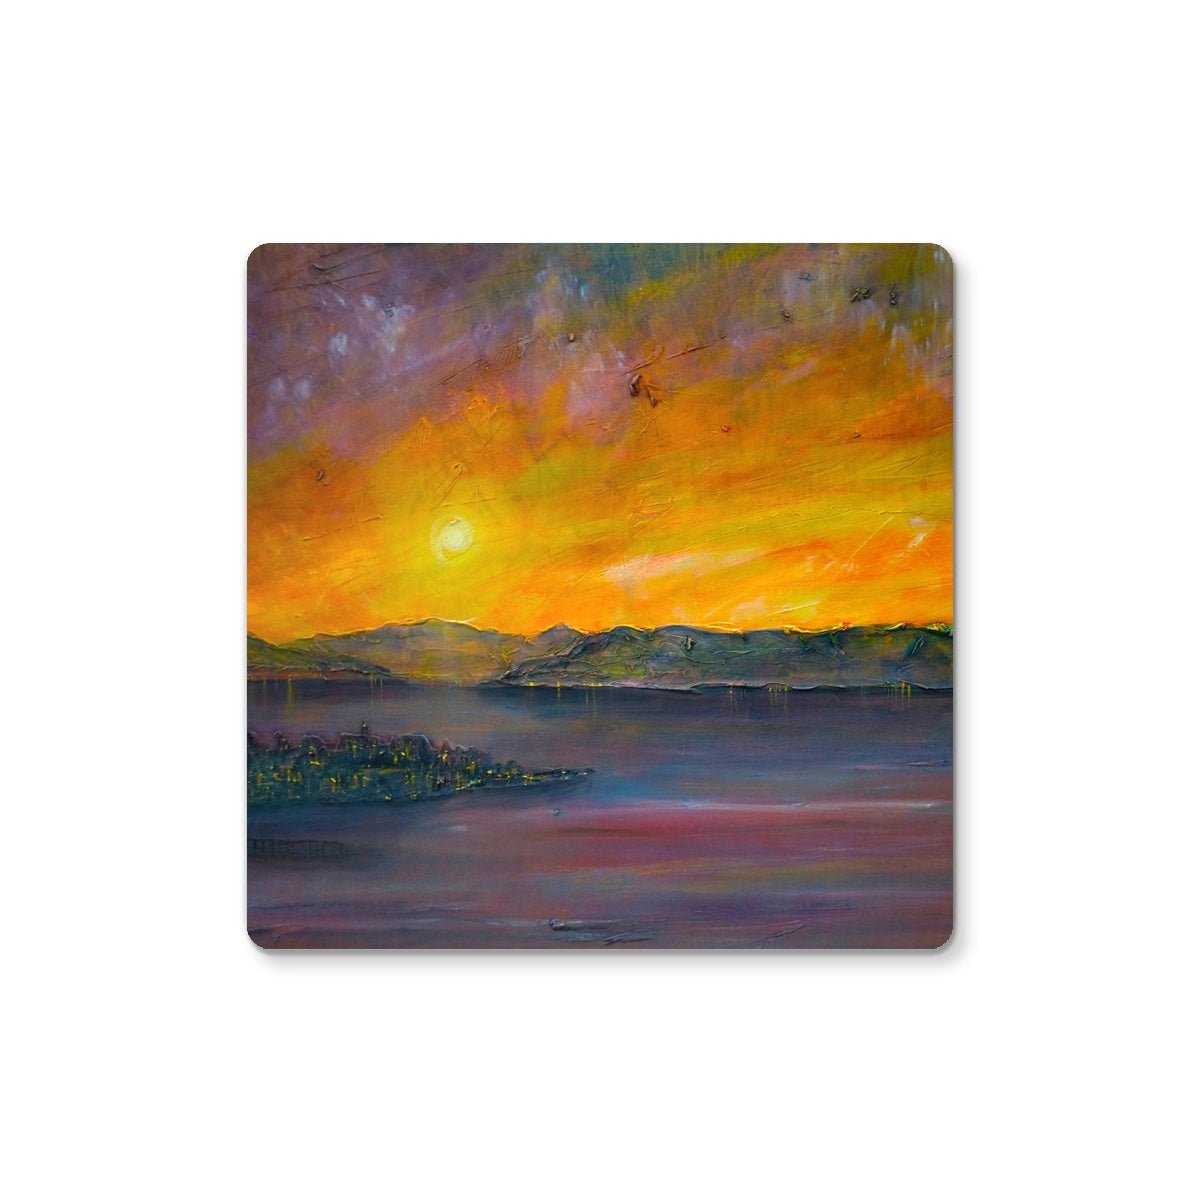 Sunset Over Gourock Art Gifts Coaster-Coasters-River Clyde Art Gallery-Single Coaster-Paintings, Prints, Homeware, Art Gifts From Scotland By Scottish Artist Kevin Hunter